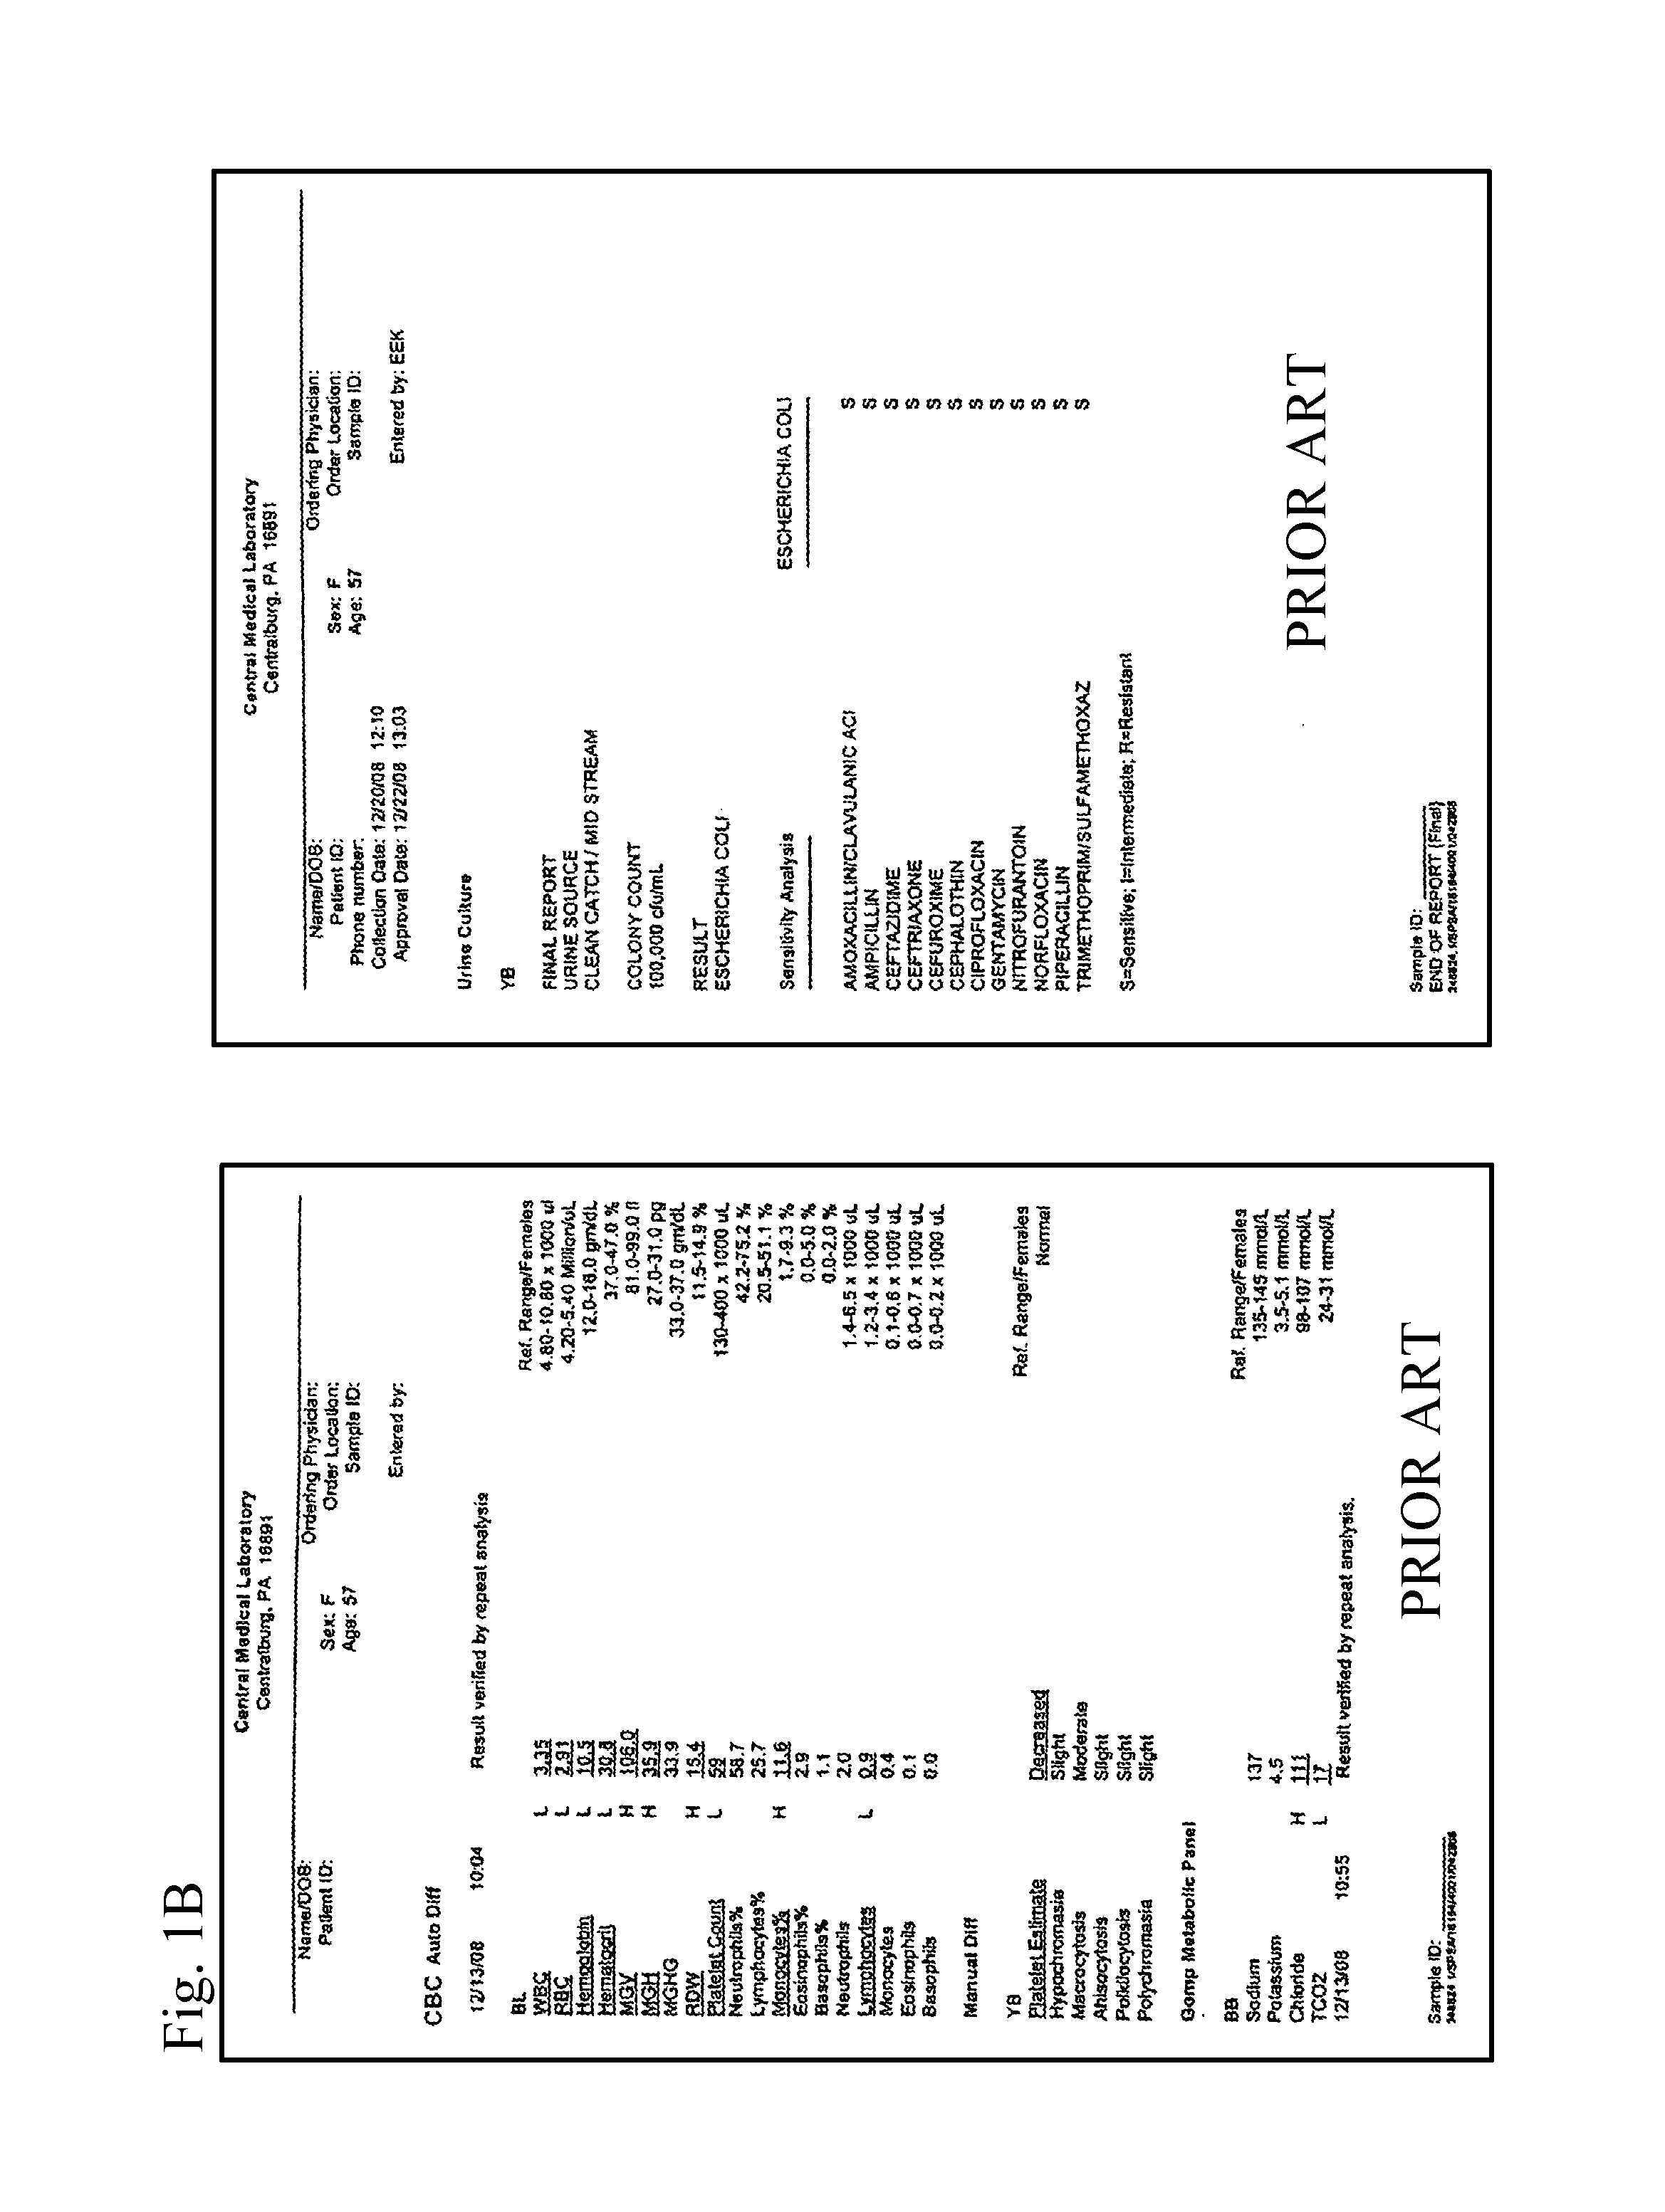 System and method for prioritization and display of aggregated data